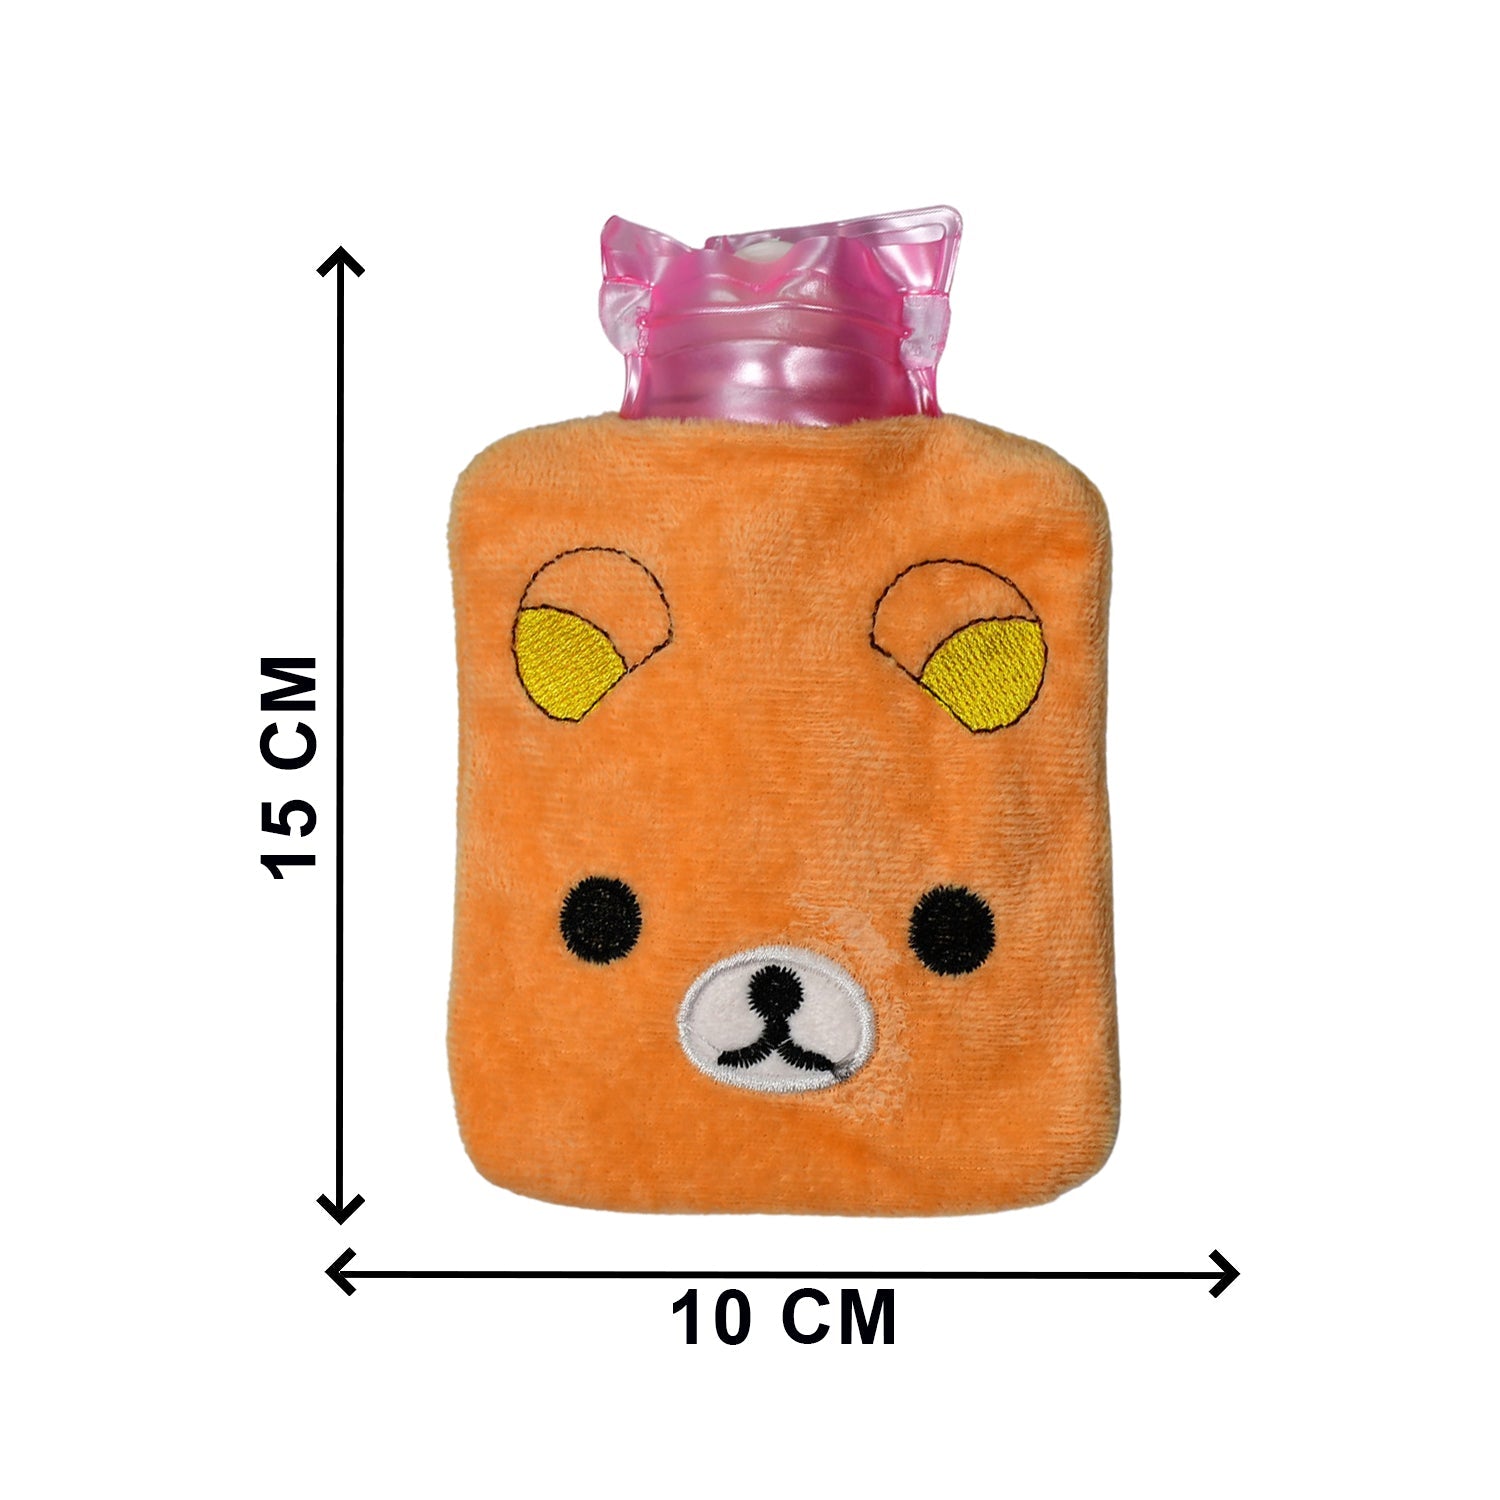 6503 Orange Panda small Hot Water Bag with Cover for Pain Relief, Neck, Shoulder Pain and Hand, Feet Warmer, Menstrual Cramps. DeoDap